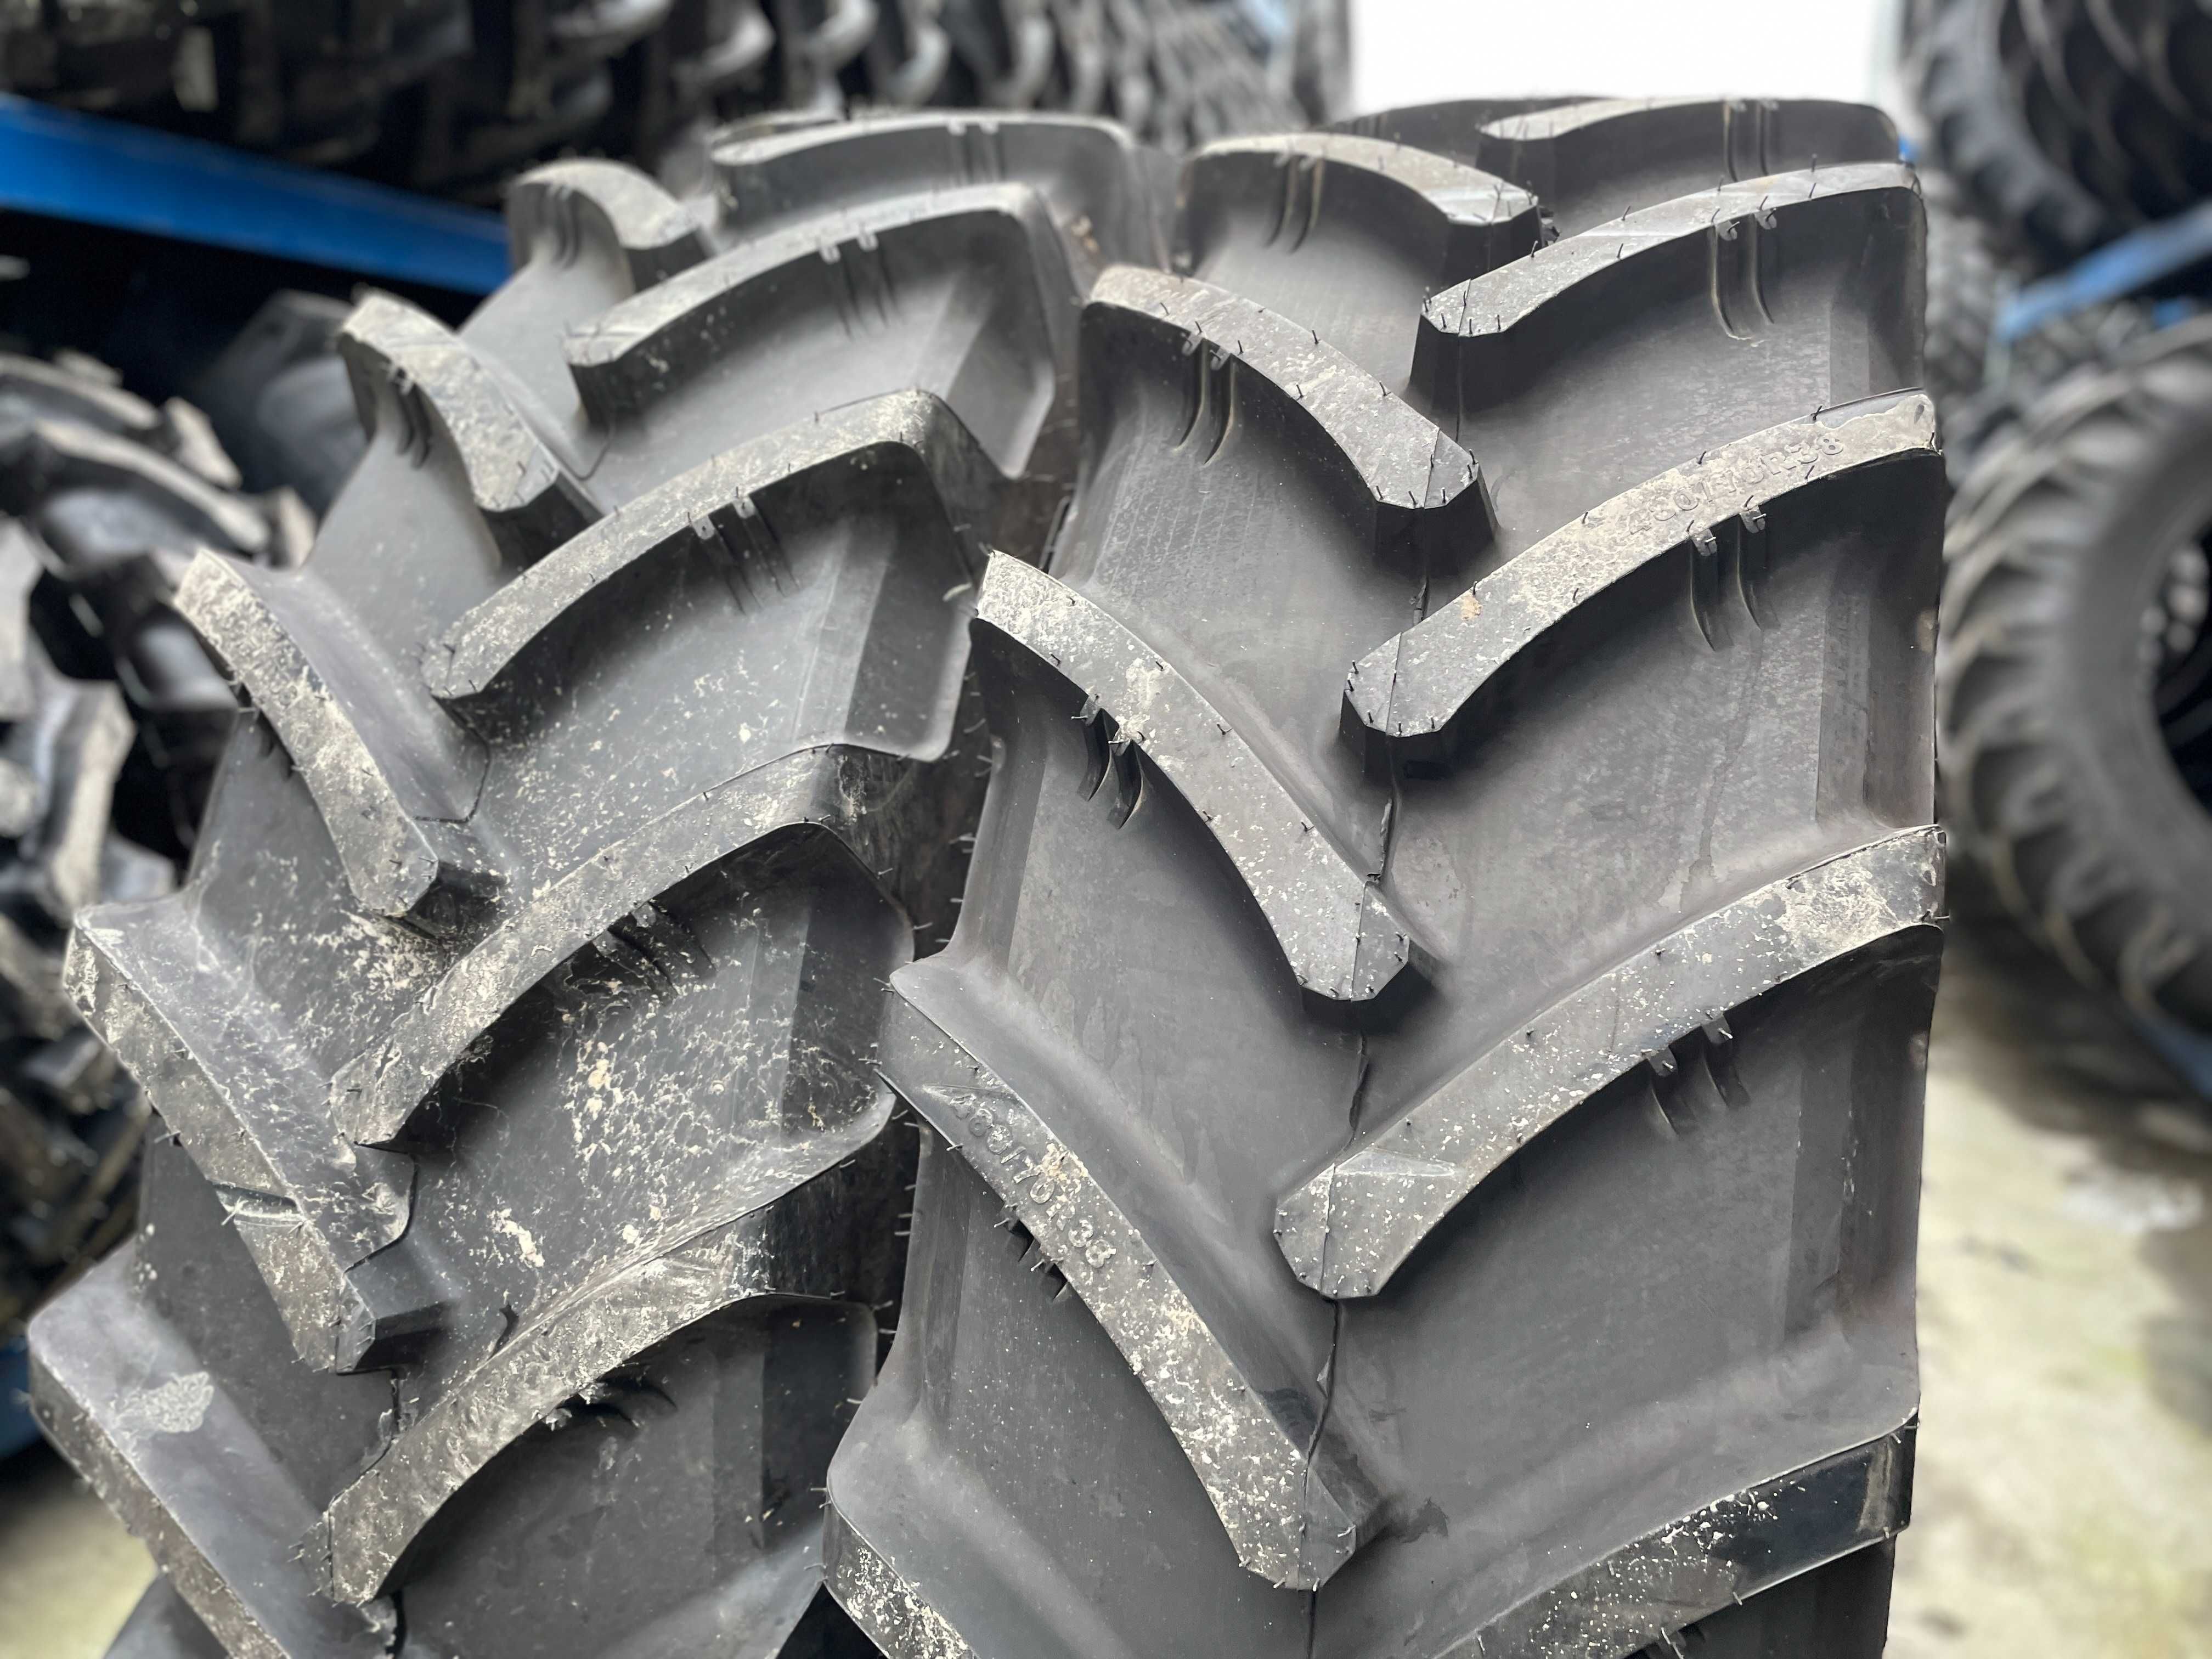 Anvelope noi Radiale de tractor spate 480/70R38 Ascenso